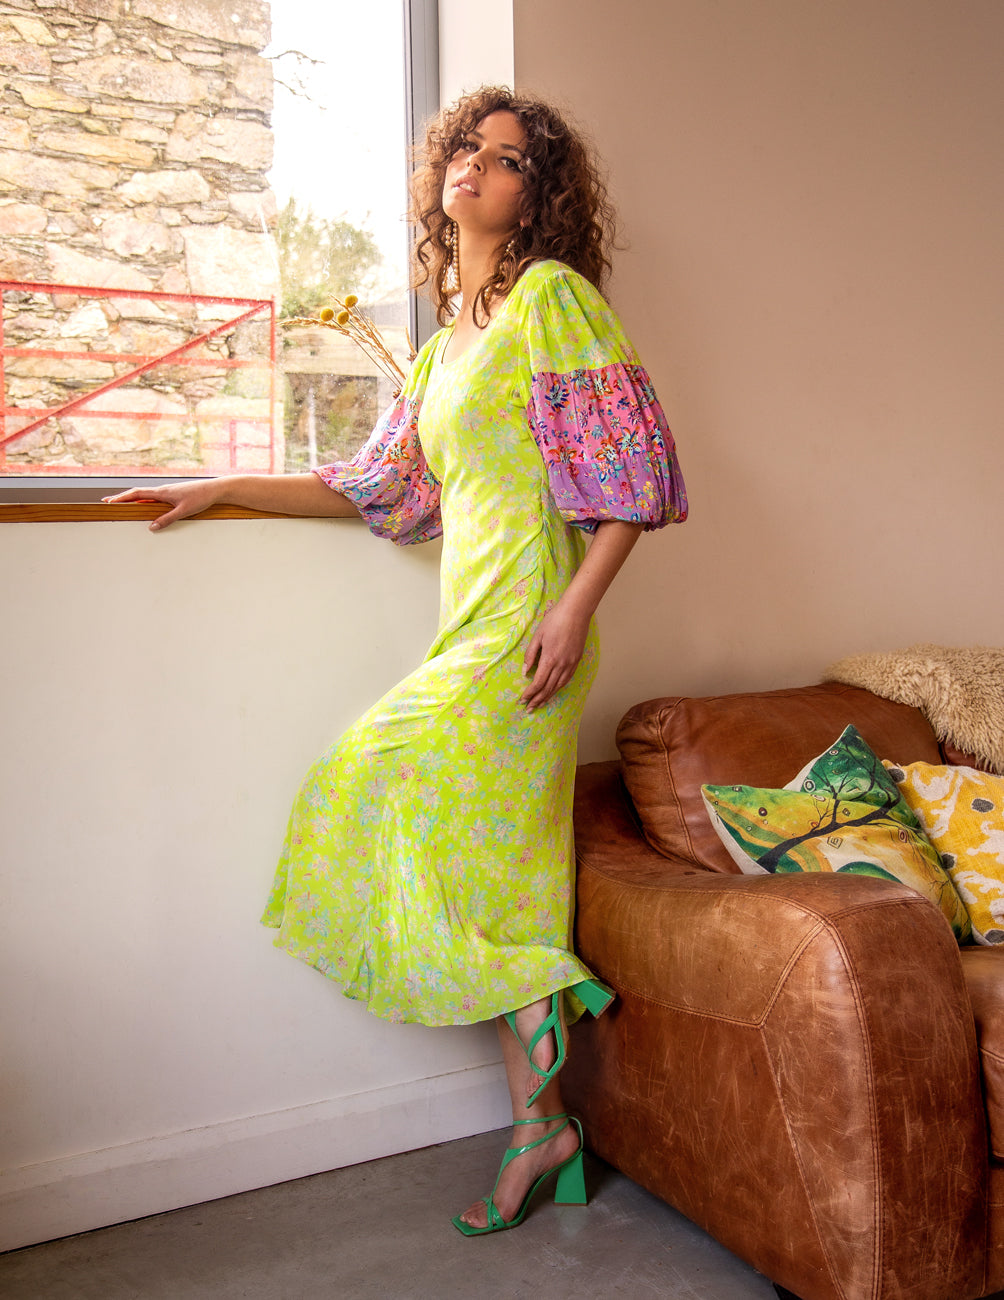 The Aisling dress in lime